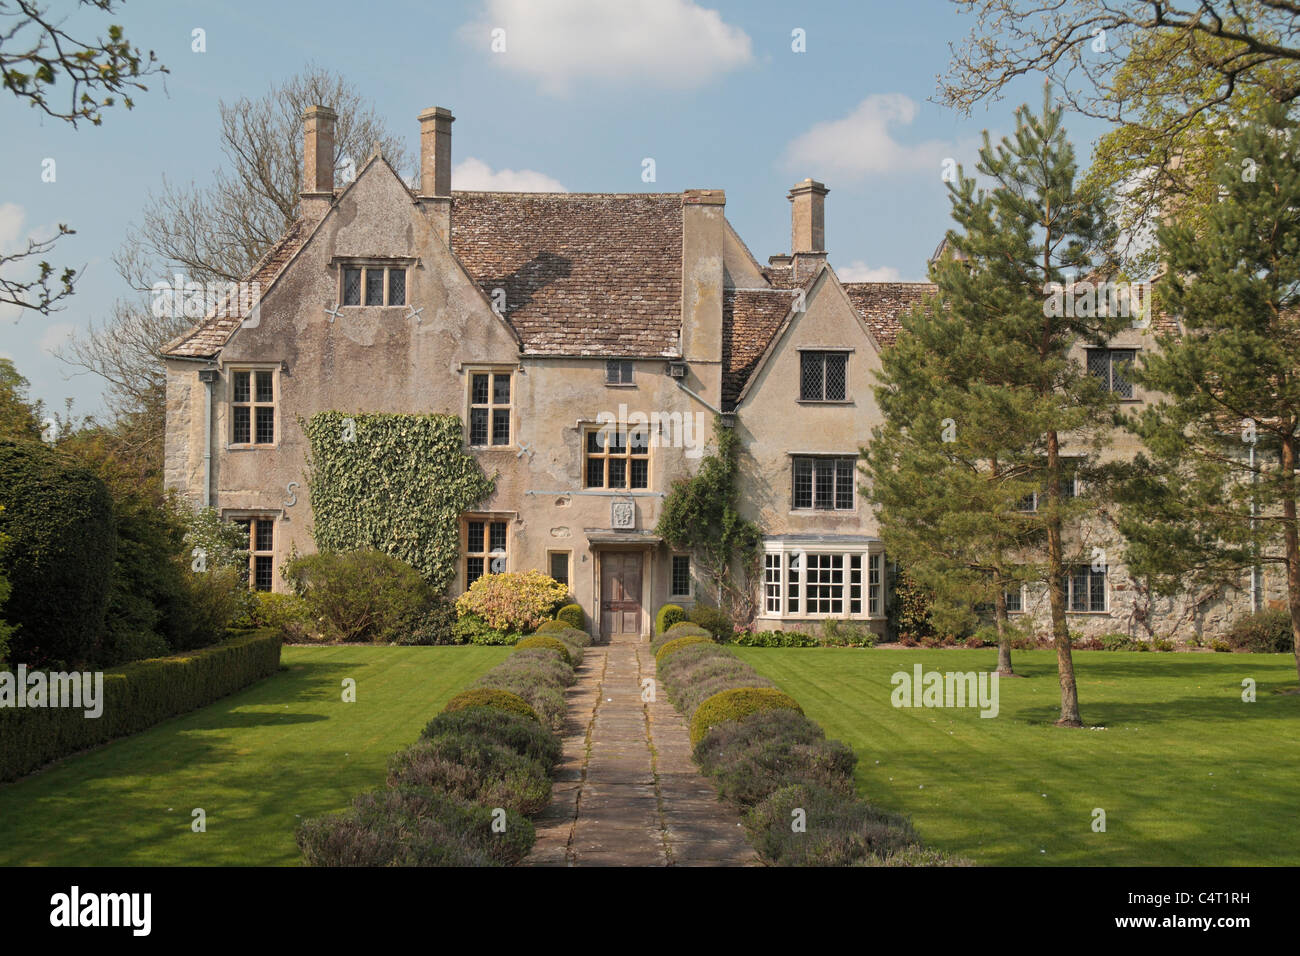 Avebury Manor, an early 16th-century manor house, in the small village of Avebury, Wiltshire, England. Stock Photo